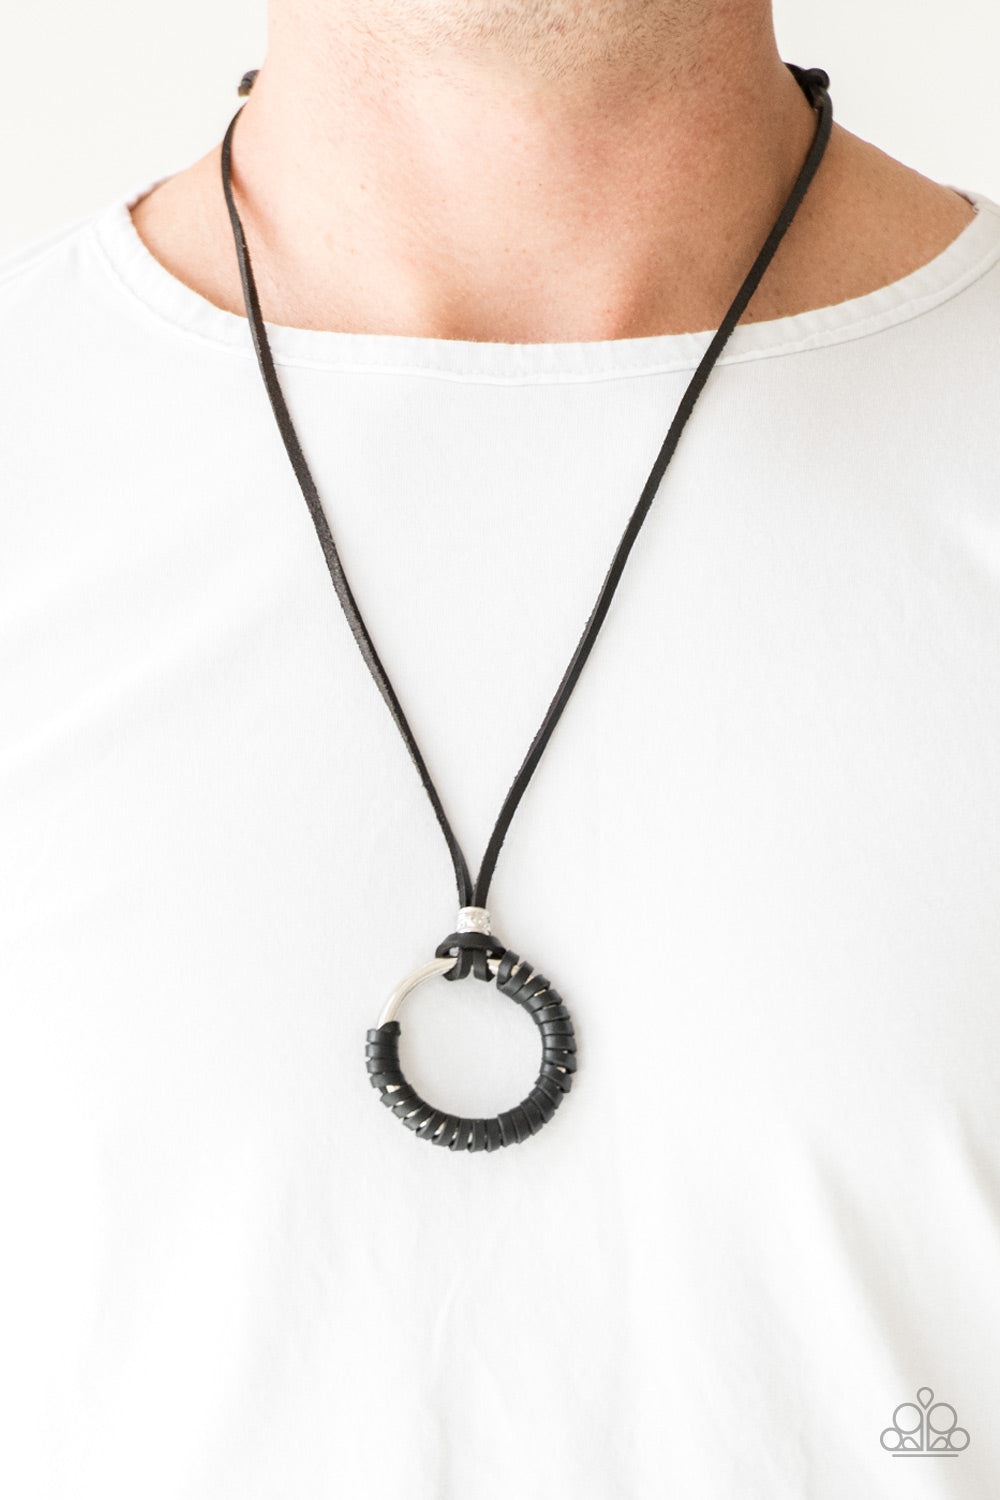 Paparazzi Get Over GRIT! - Black Leather - Urban Necklace - $5 Jewelry With Ashley Swint